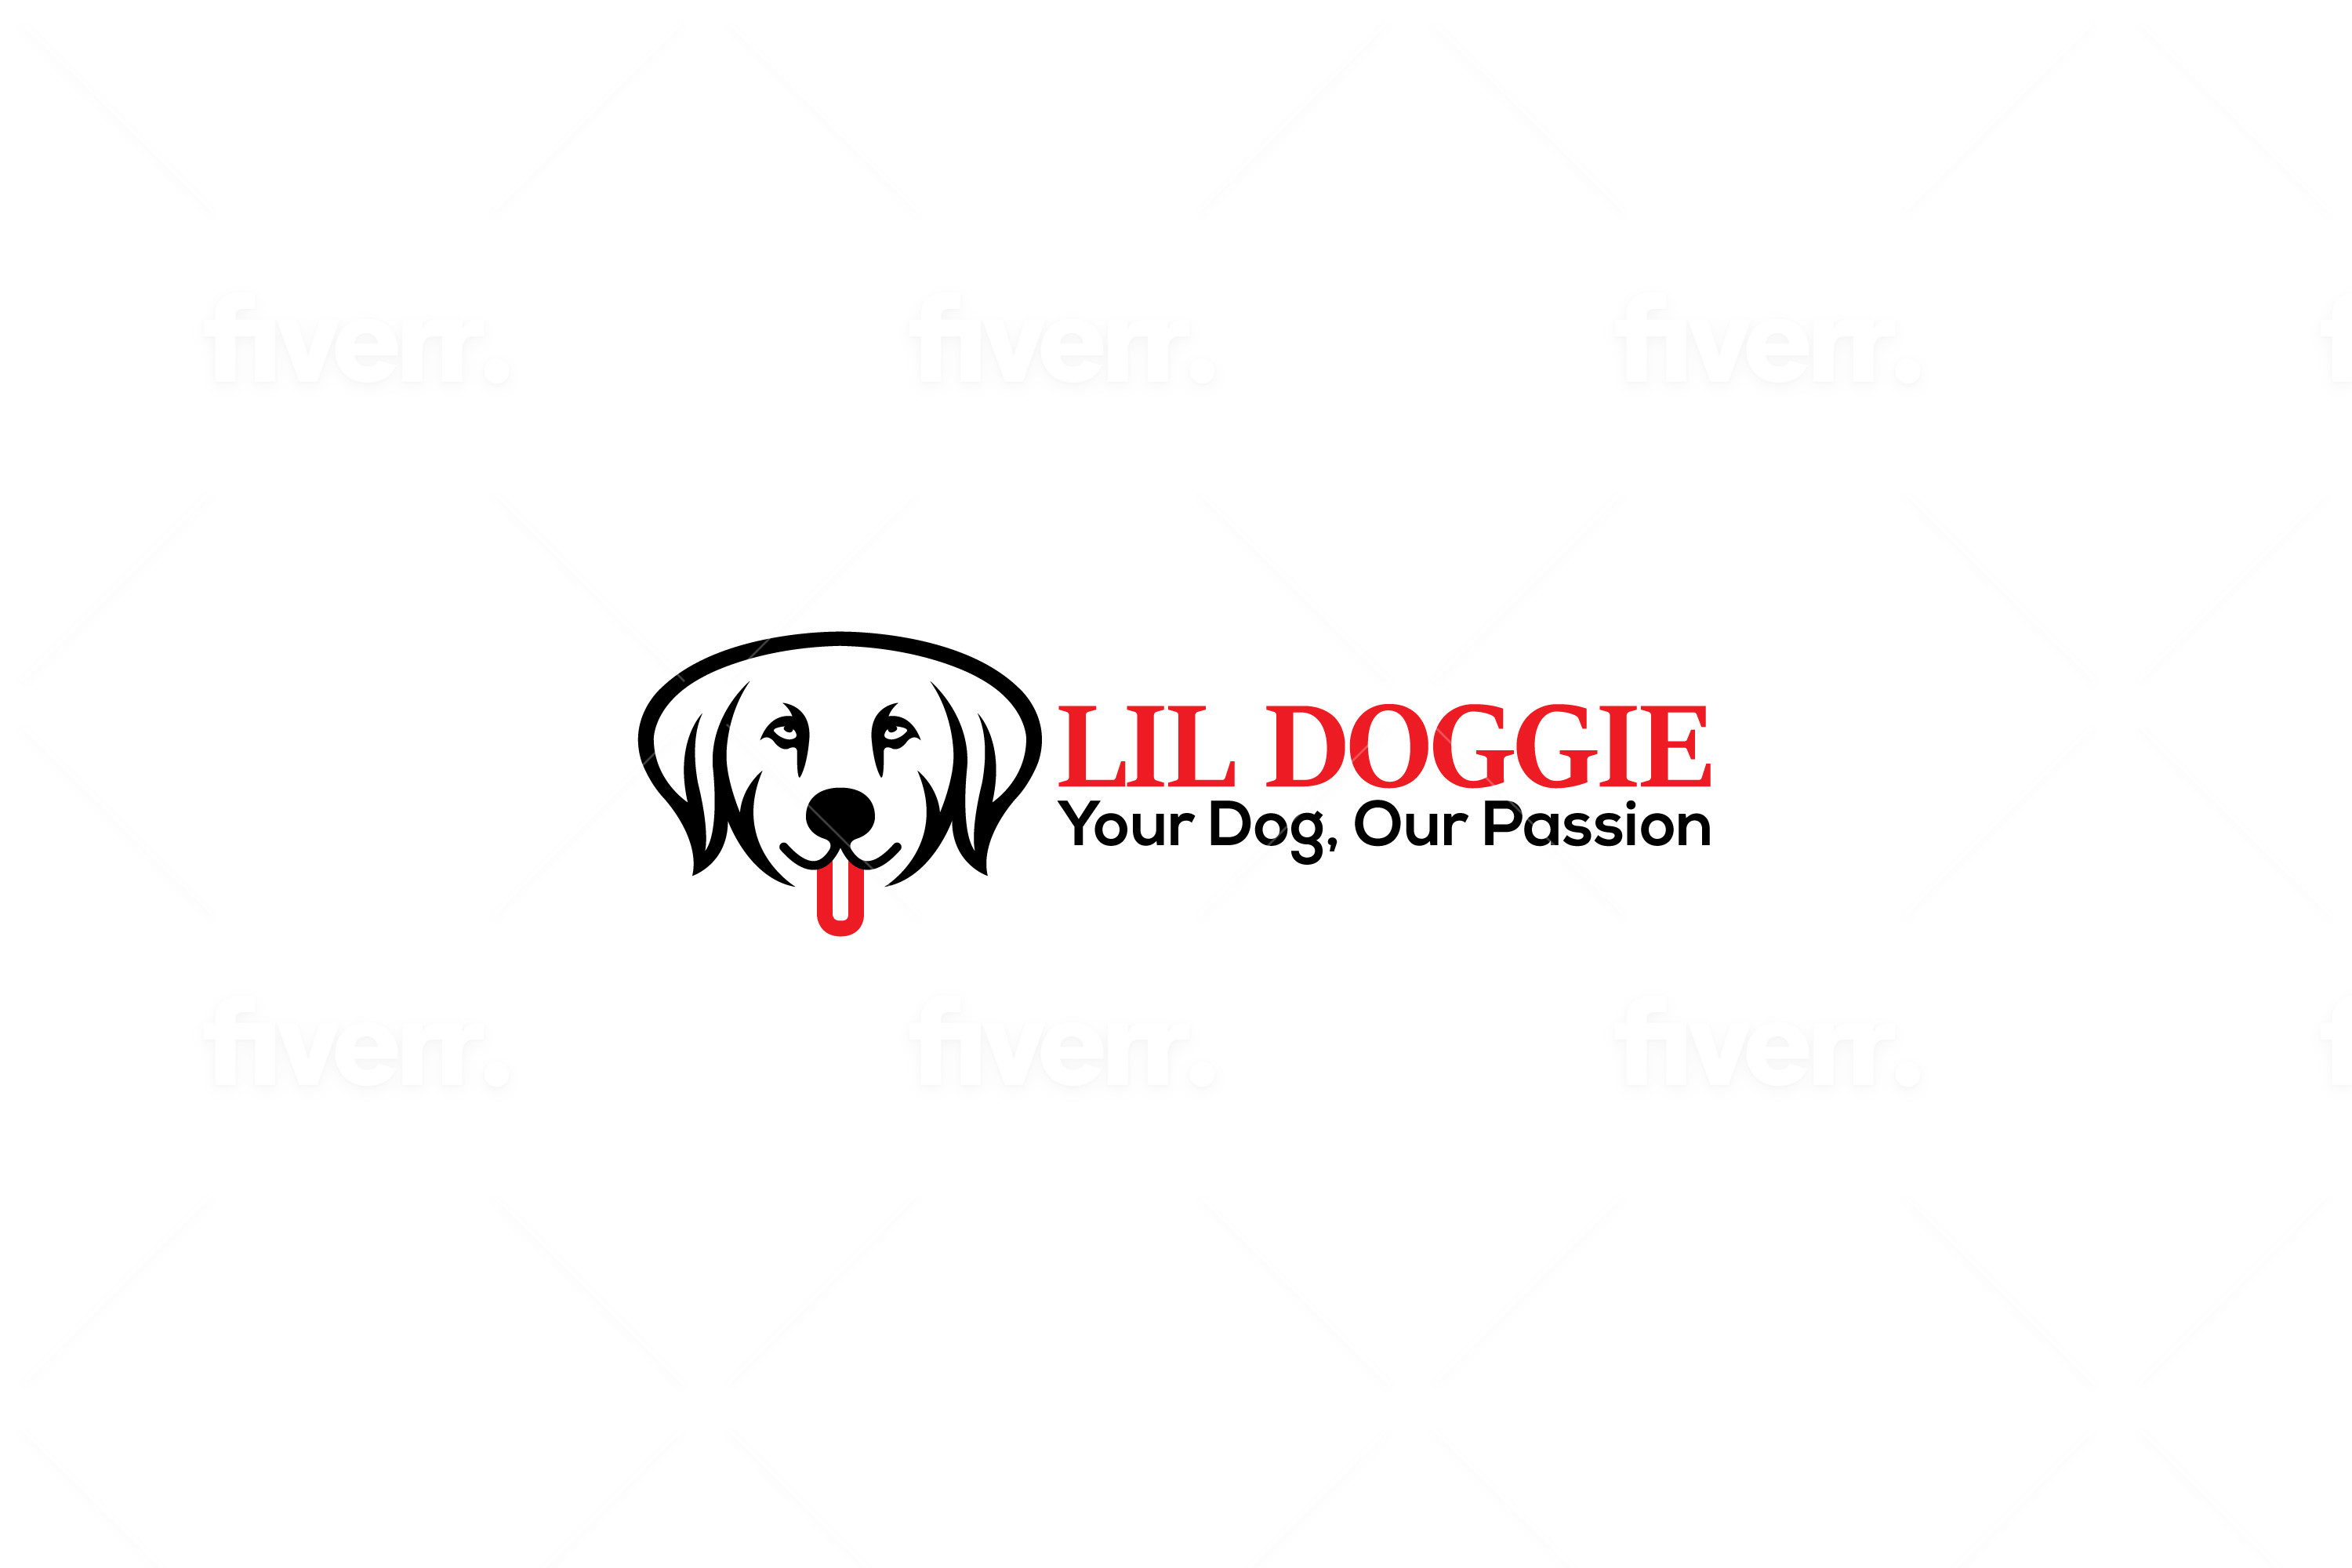 Logo of Lil'doggie Dog Walkers In Great Ayton, Middlesbrough